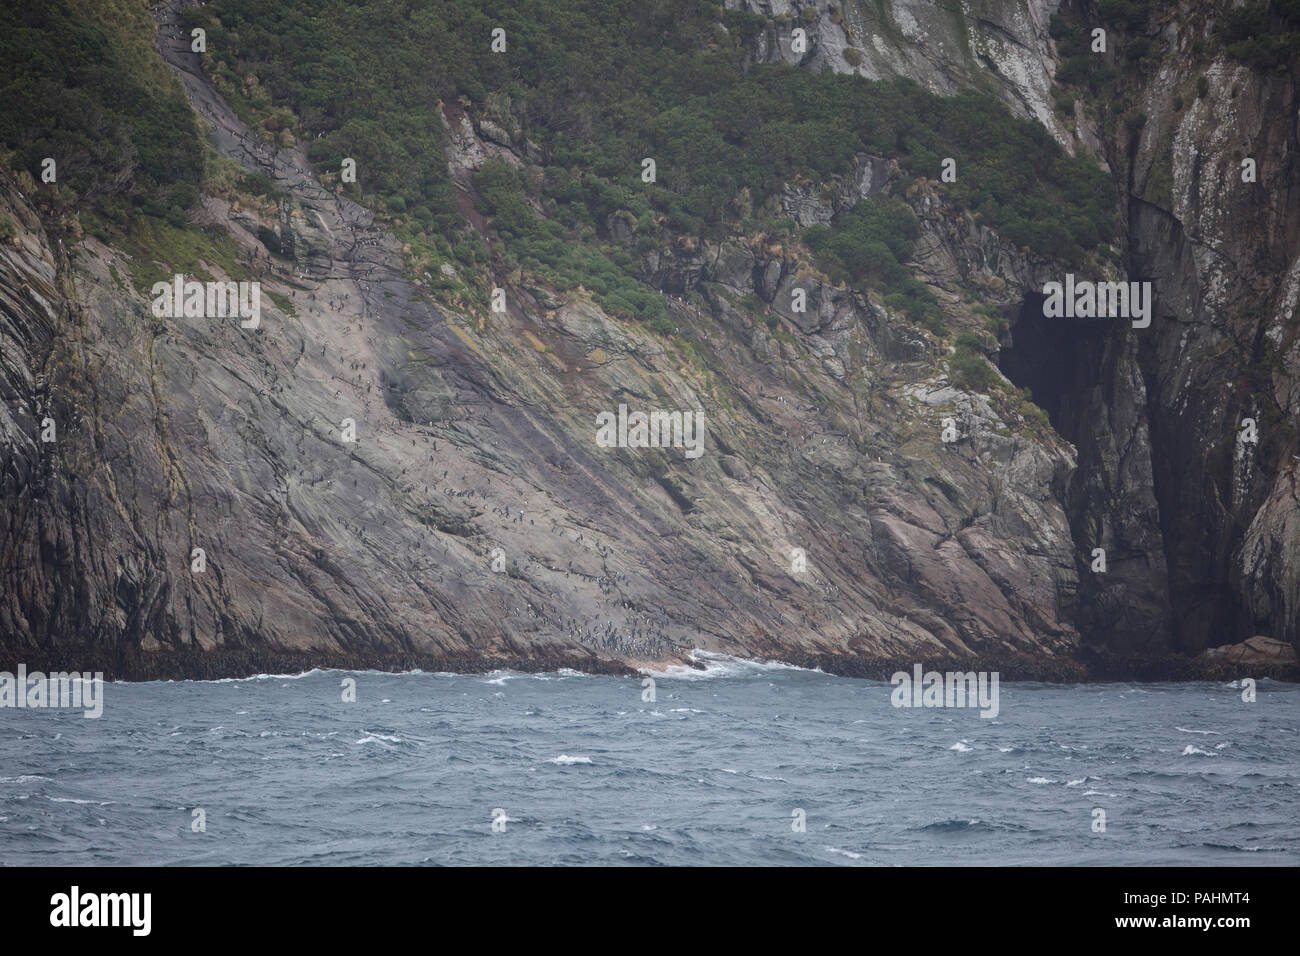 Penguins on the Snares Islands, New Zealand Stock Photo